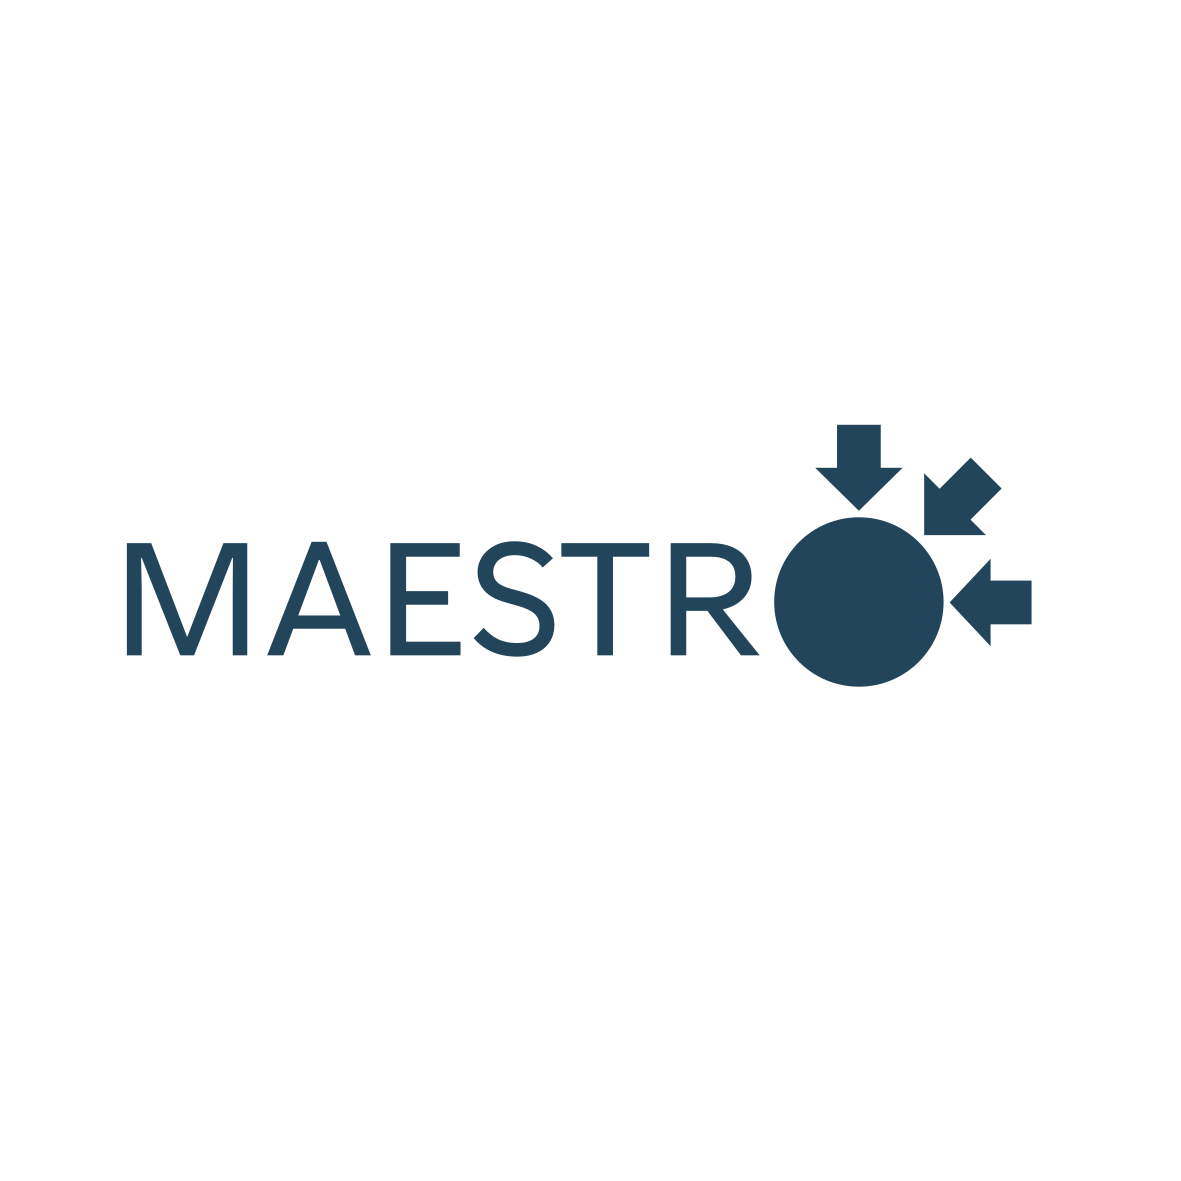 Project Management Tool For The Construction Field | Maestro*